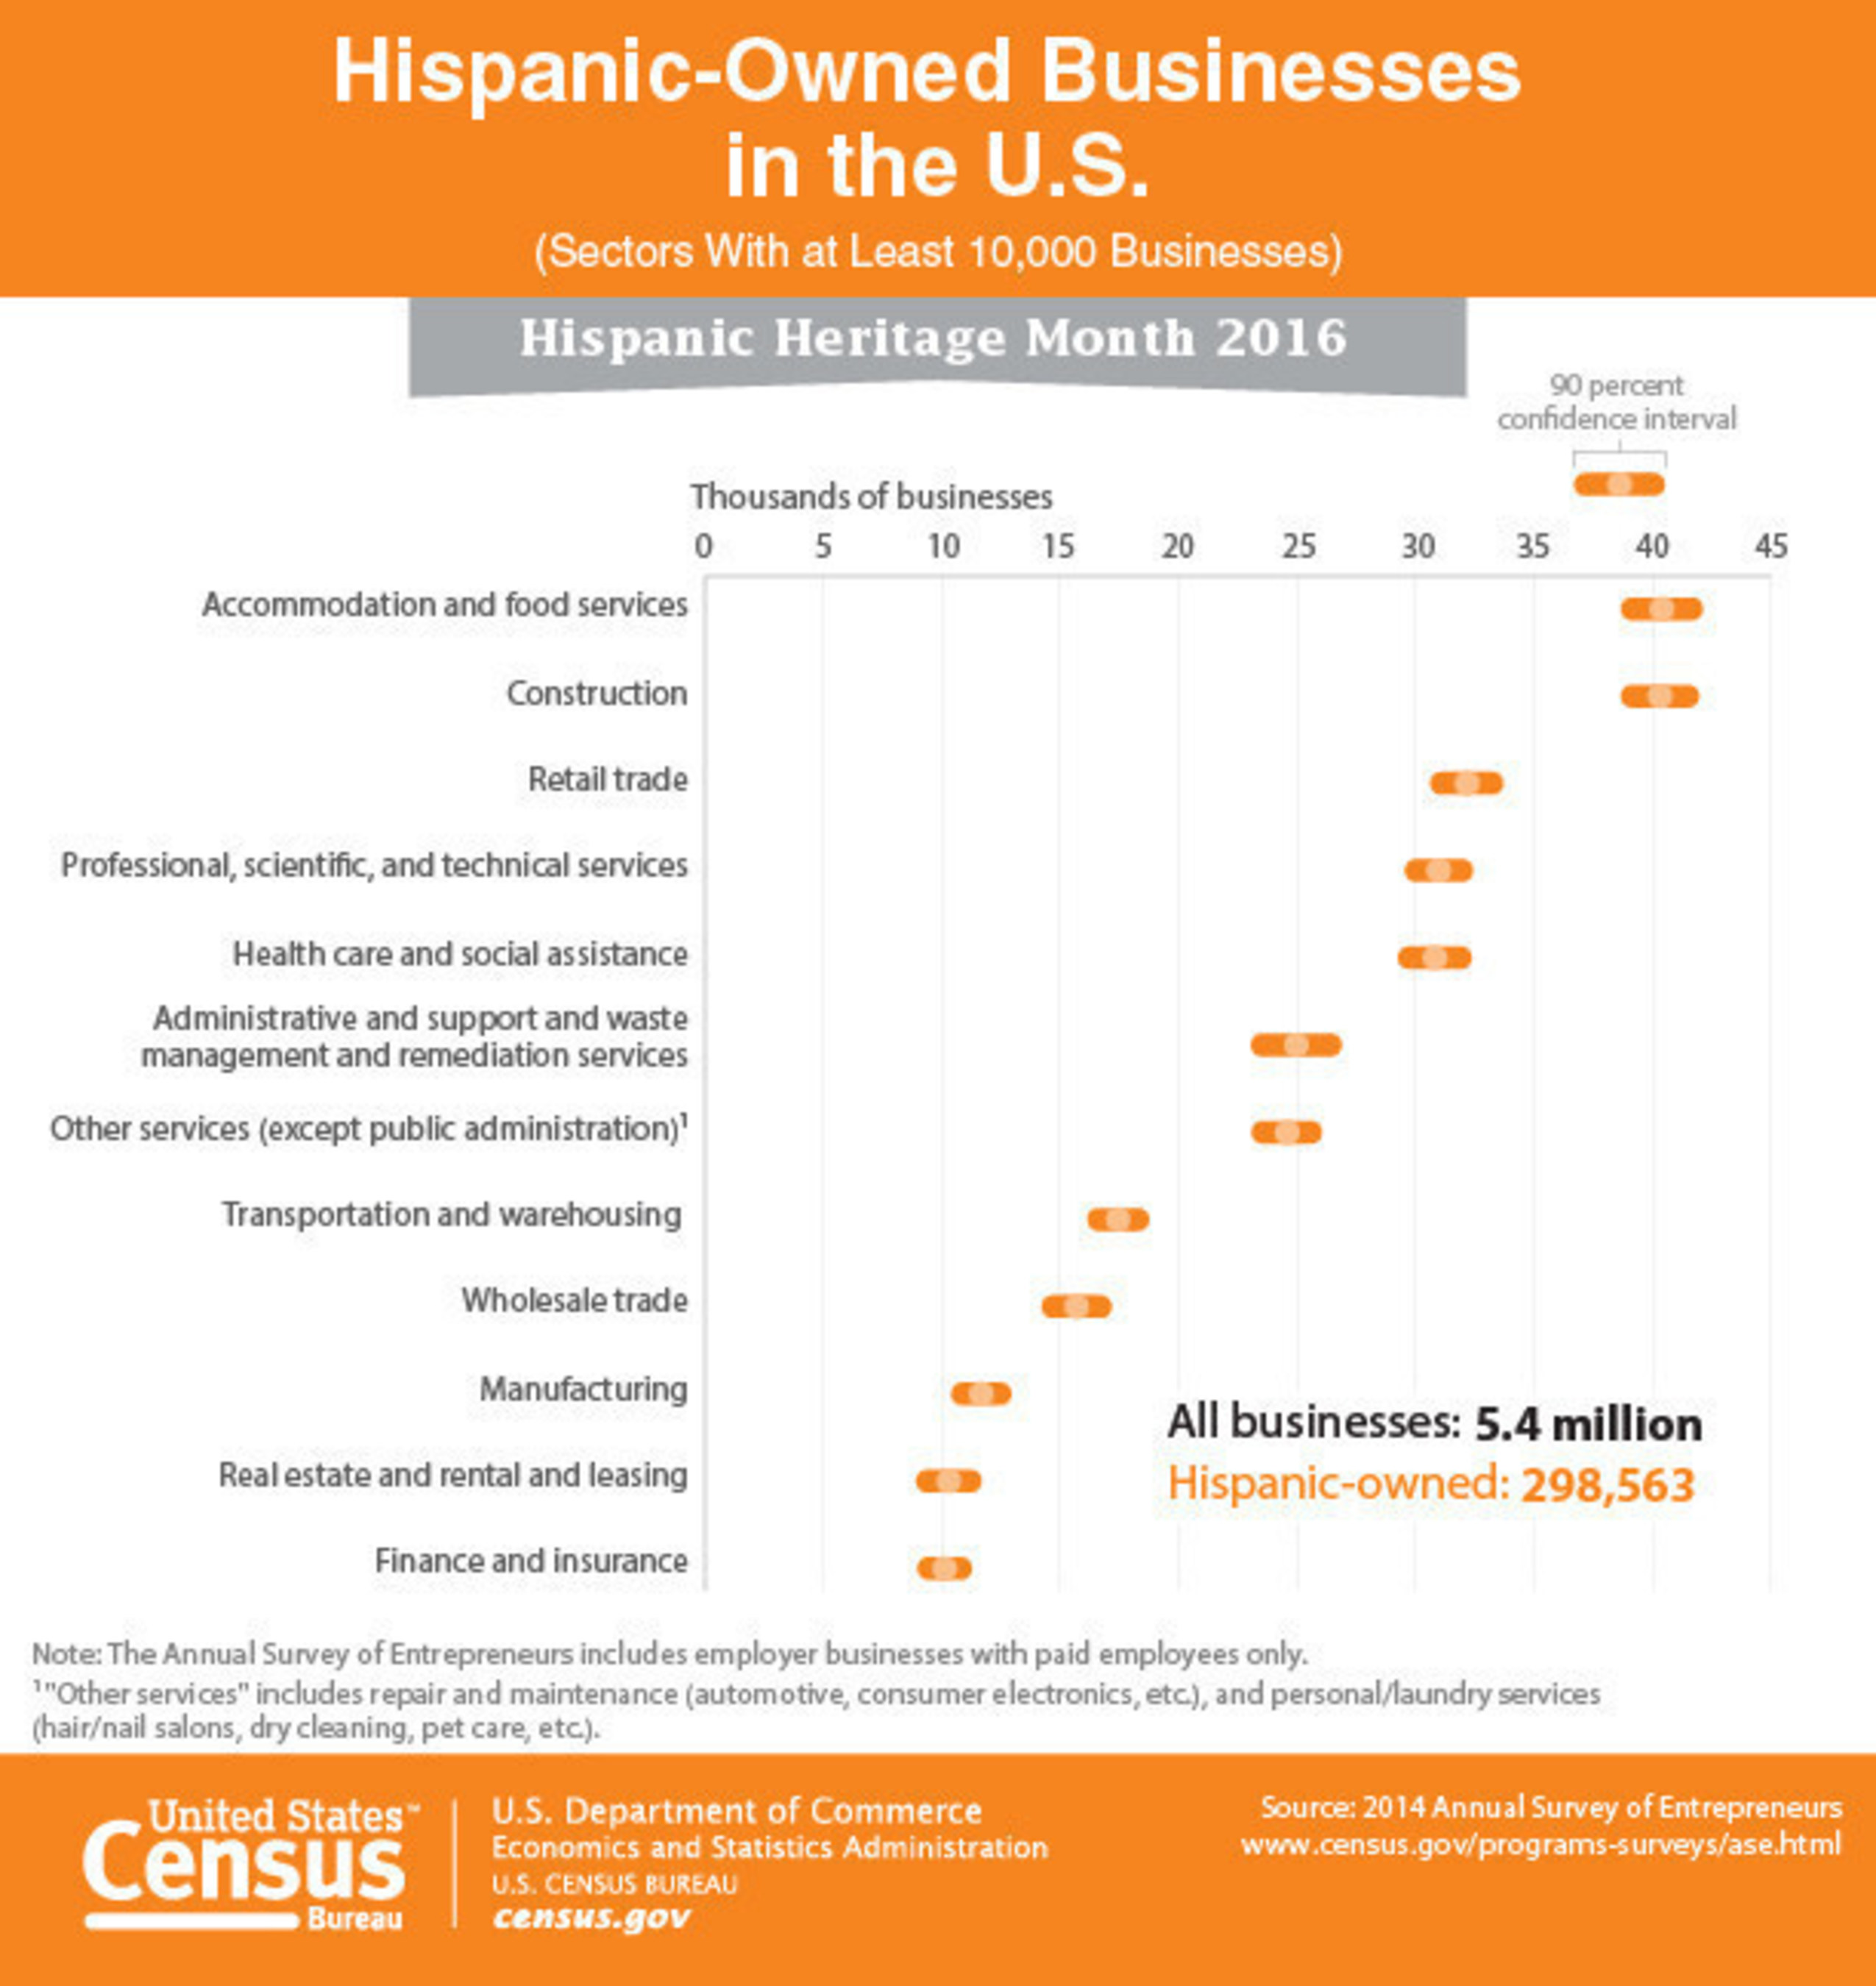 This graphic uses the 2014 Annual Survey of Entrepreneurs to take a look at Hispanic-owned businesses in commemoration of Hispanic Heritage Month.